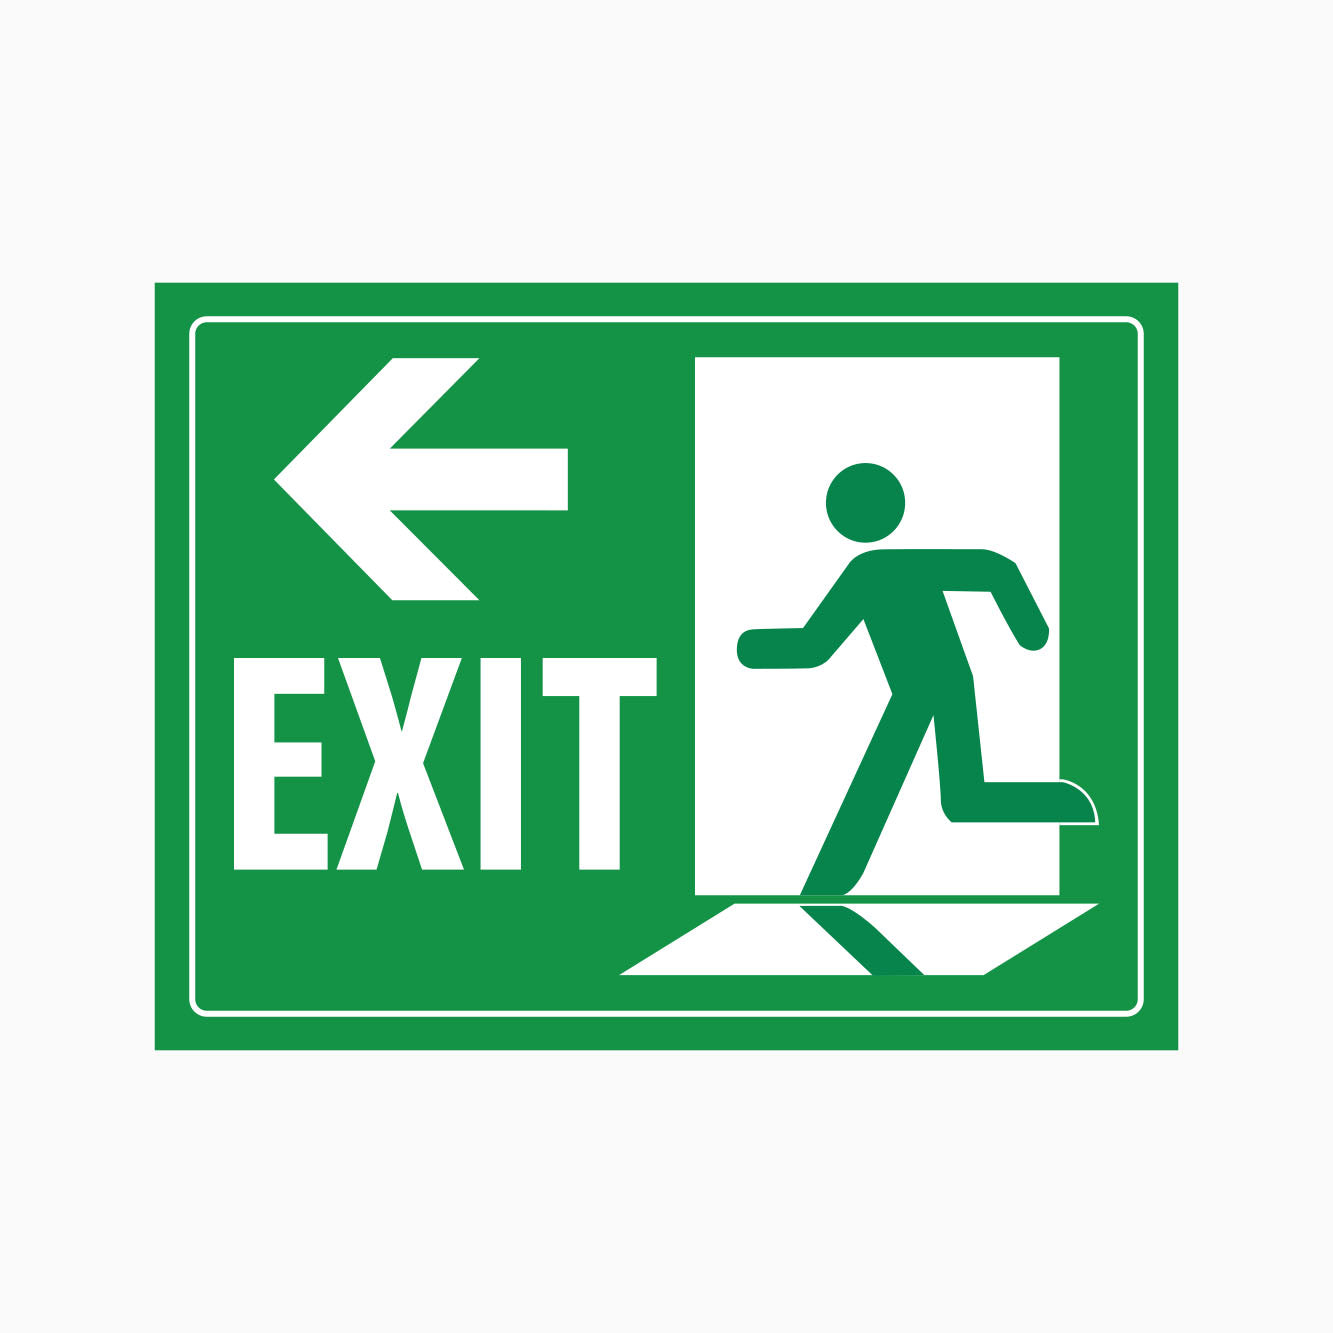 EMERGENCY EXIT SIGN - Left Arrow - GET SIGNS